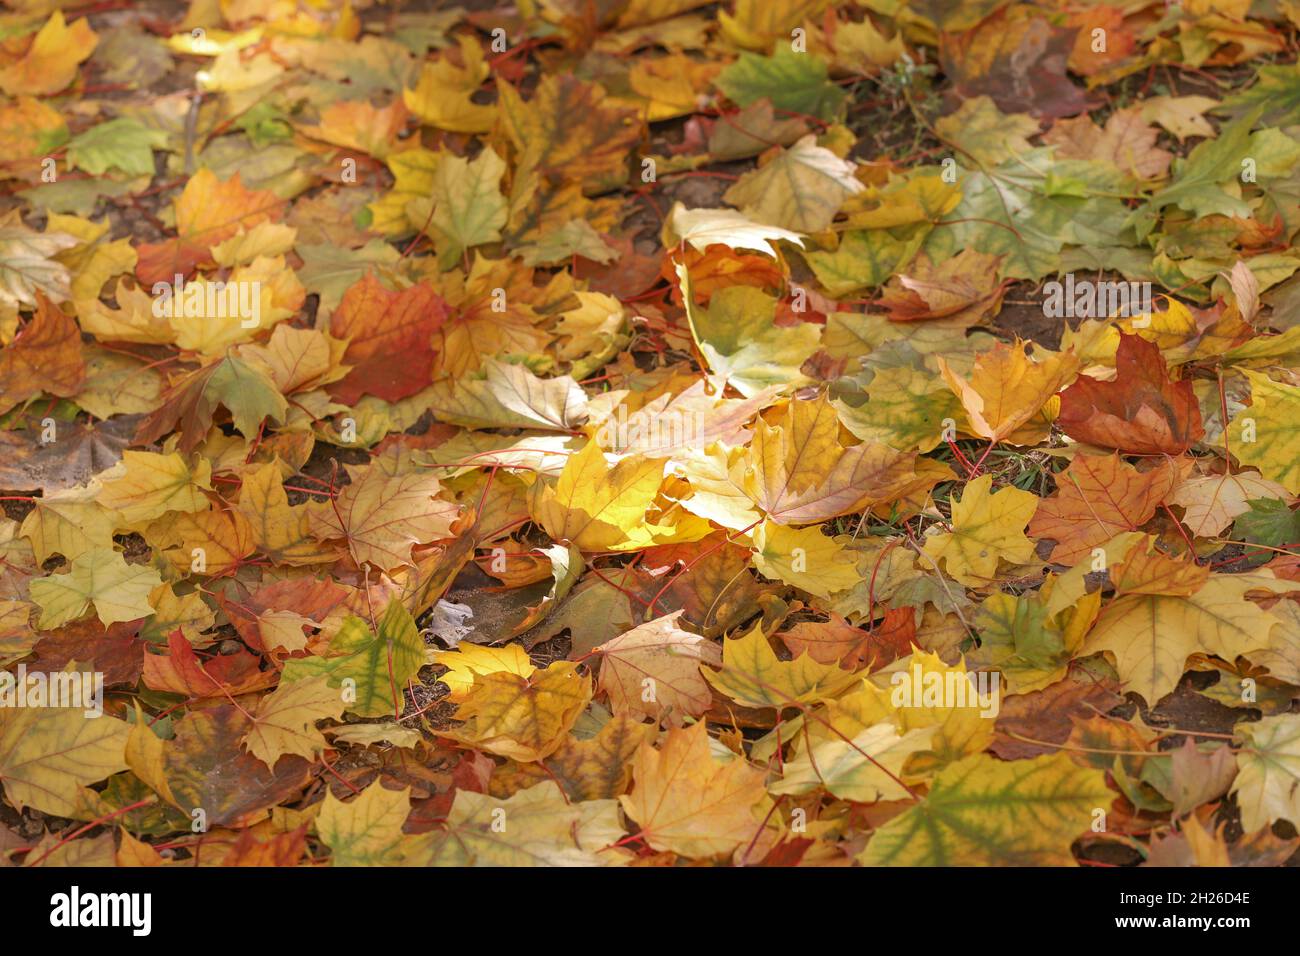 Foliage, Autumn leaves lit by the sun on the ground. Stock Photo